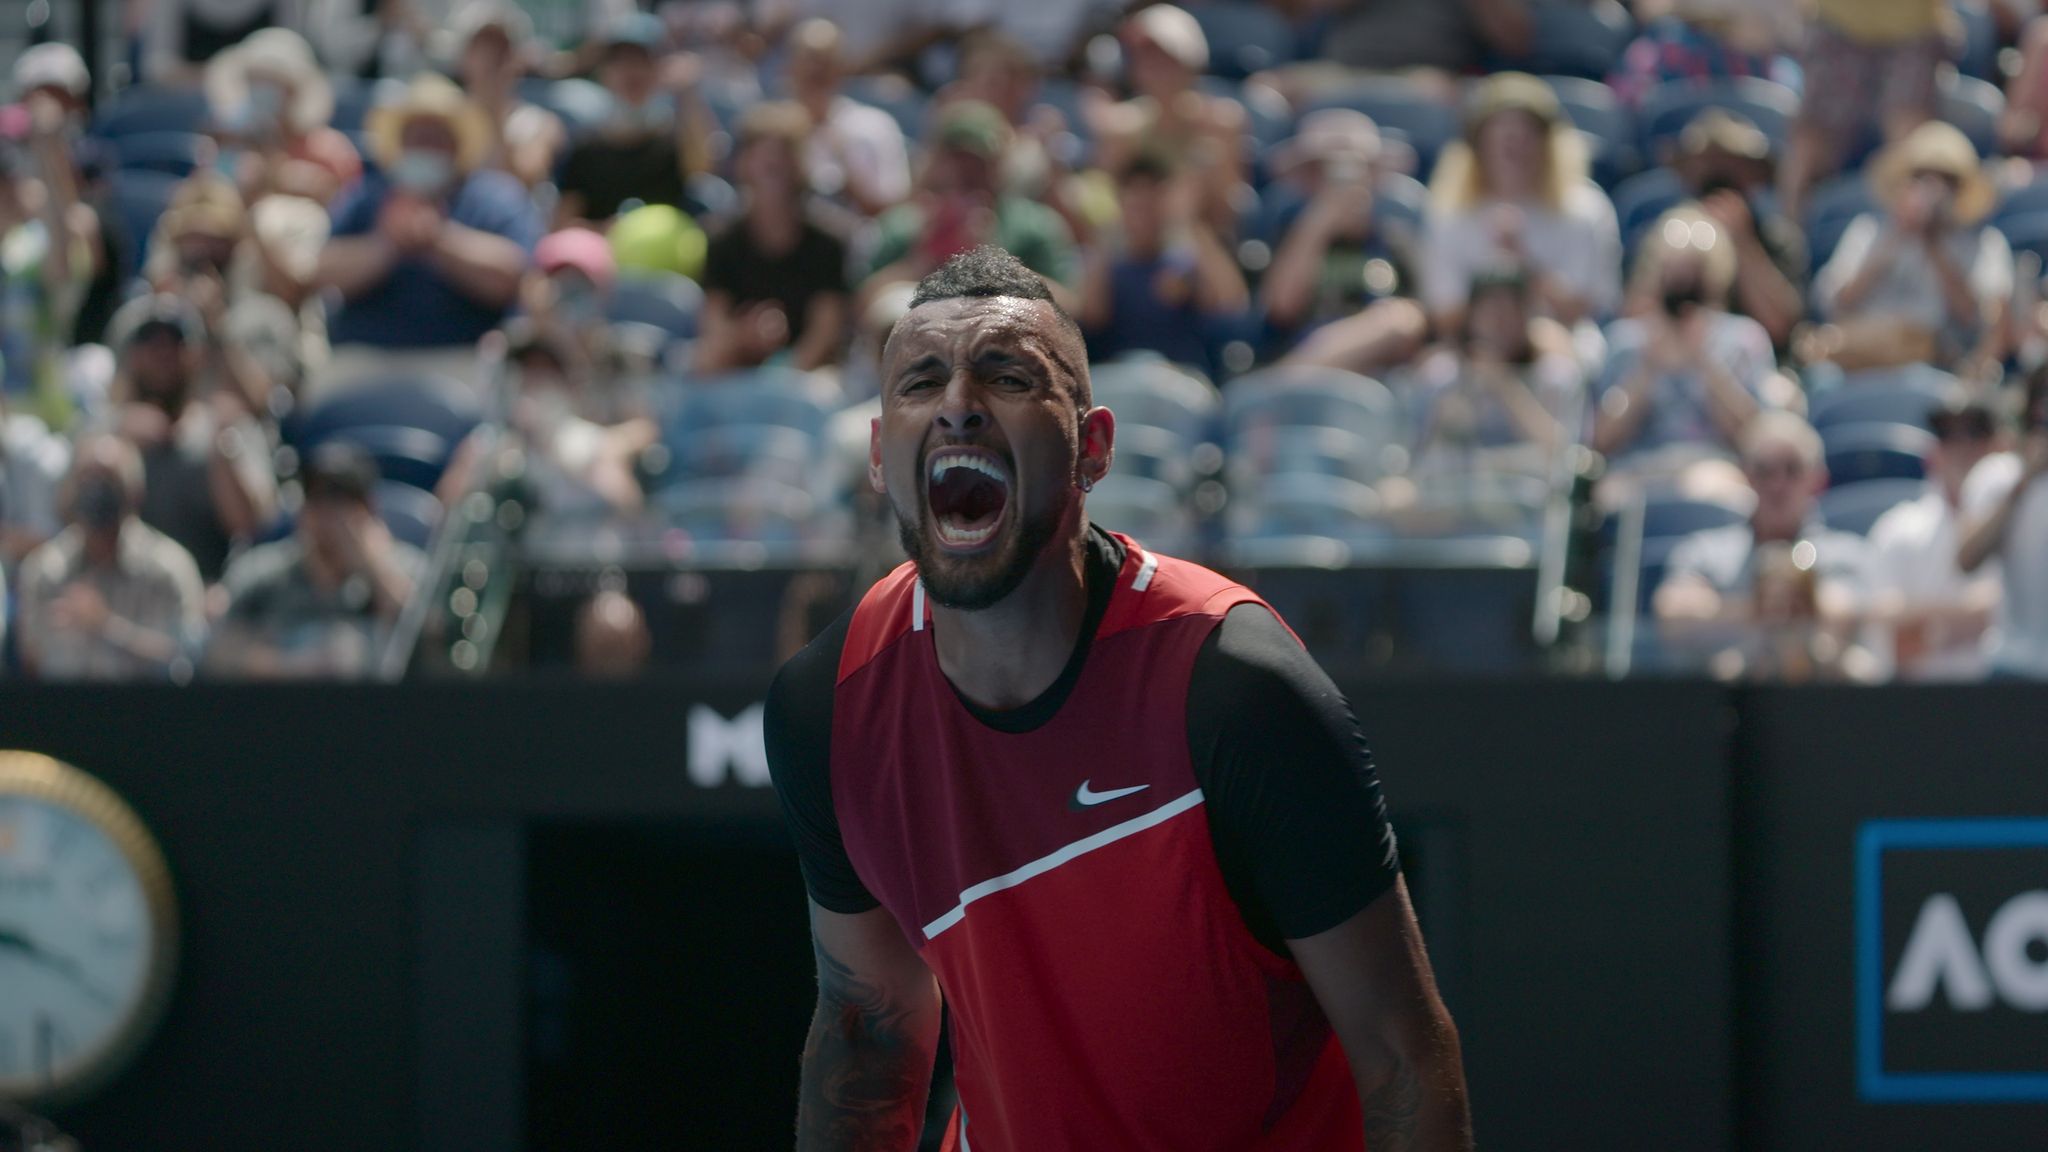 How players from Netflix's tennis documentary 'Break Point' fared